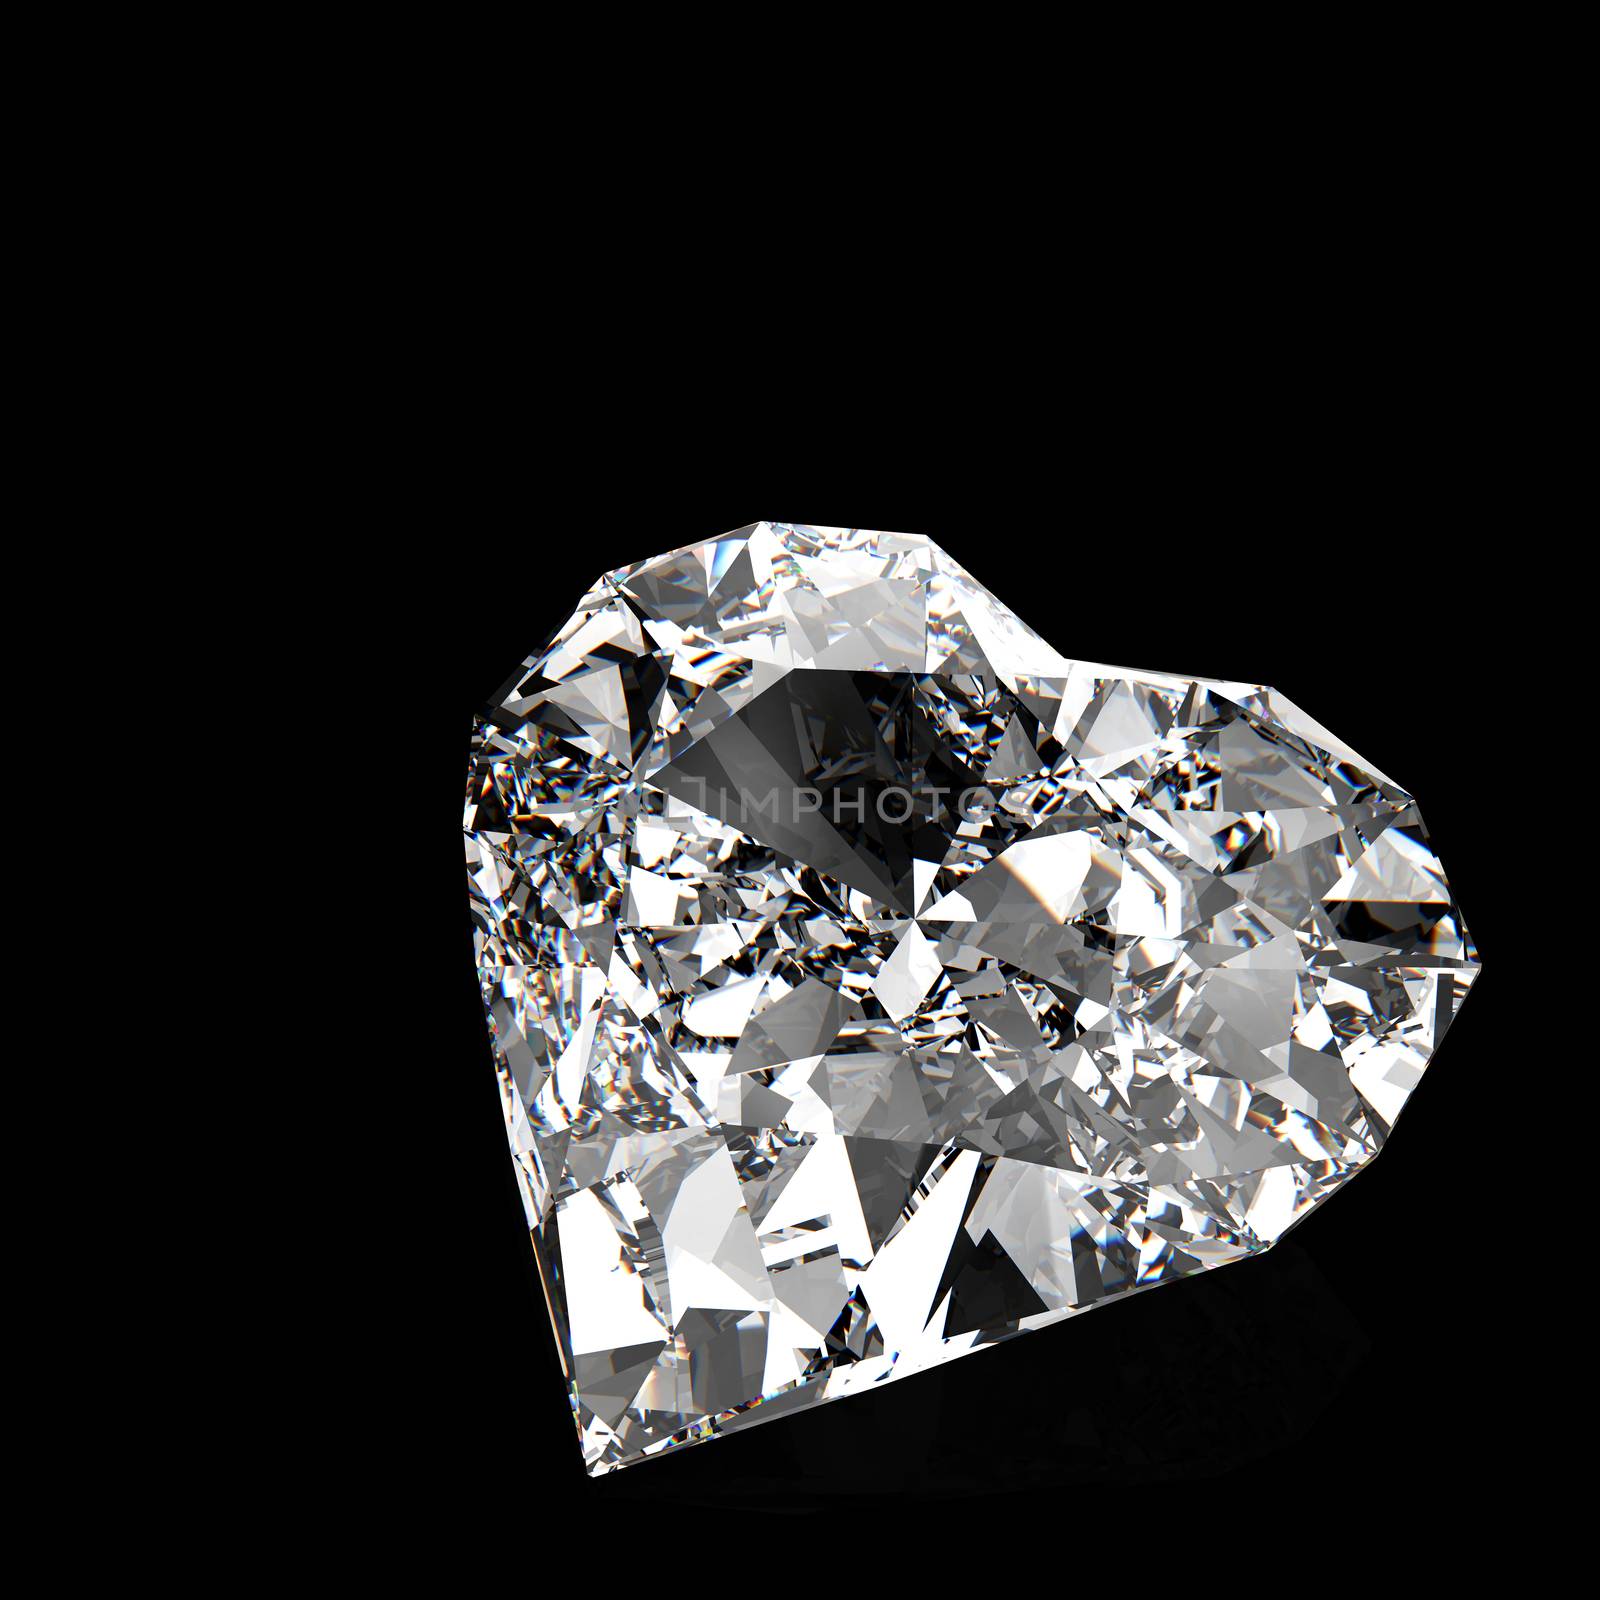 diamond heart shape on black surface by everythingpossible